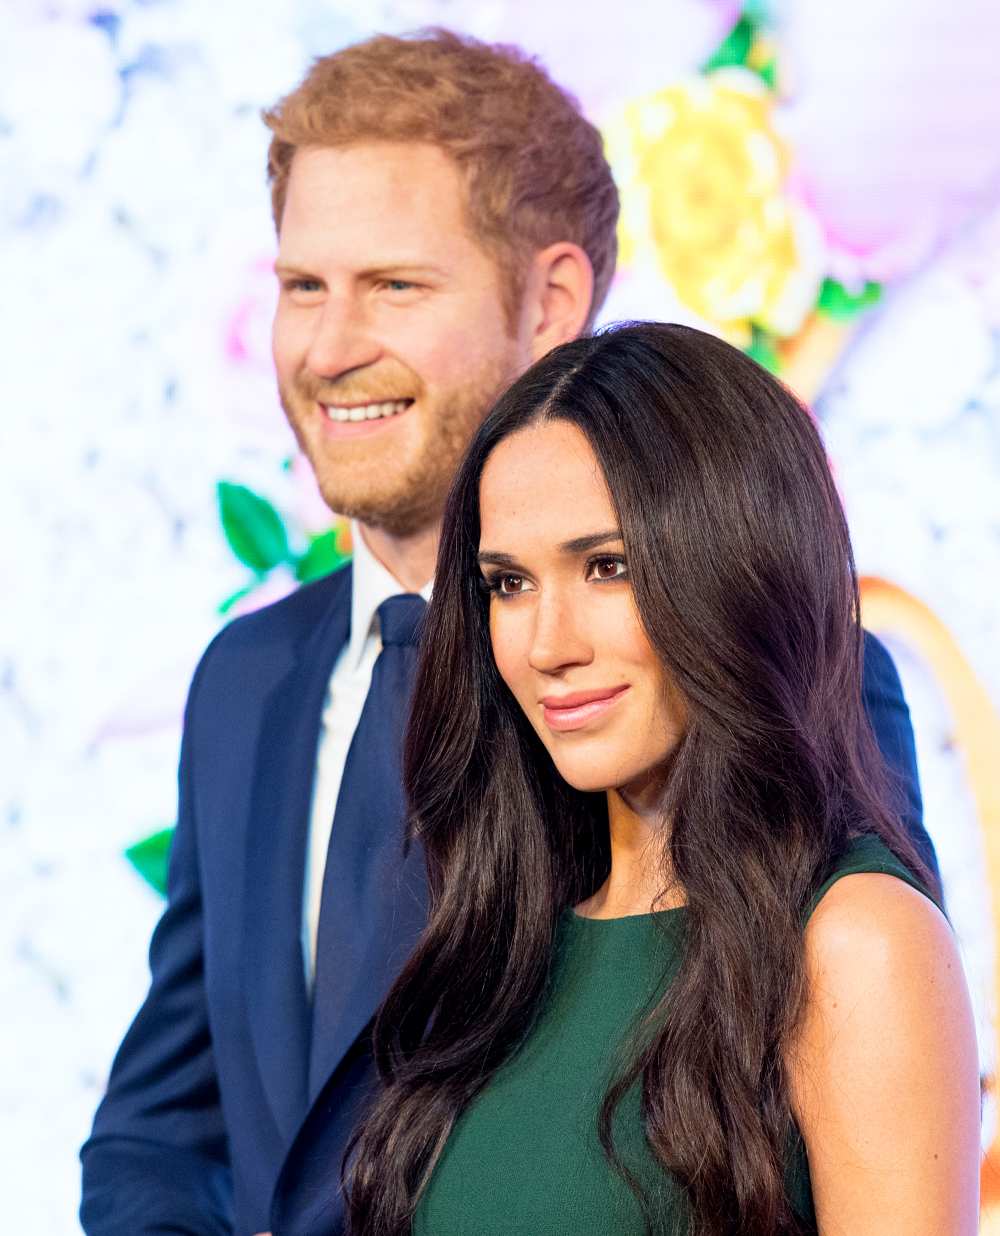 Madame Tussauds unveils a wax figure of Meghan Markle at Madame Tussauds London on May 9, 2018 ahead of her wedding to Prince Harry.